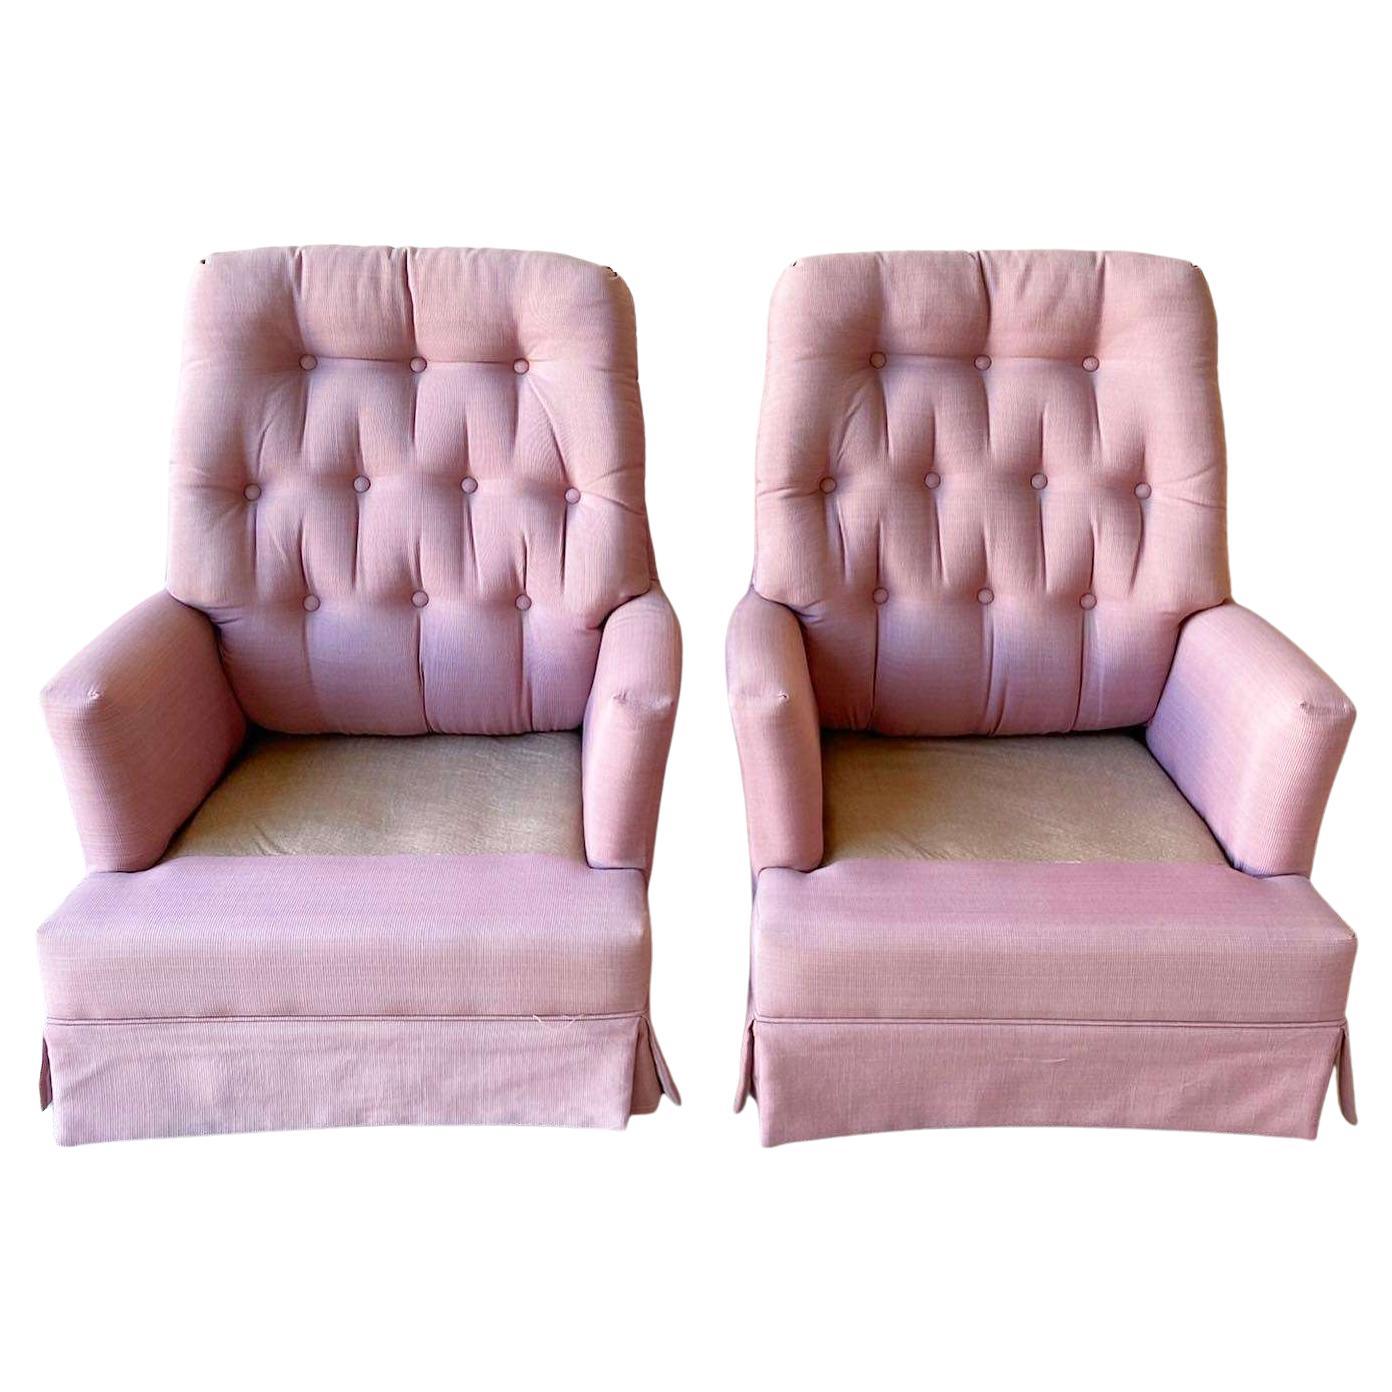 Mid Century Modern Pink Tufted Swivel Chairs